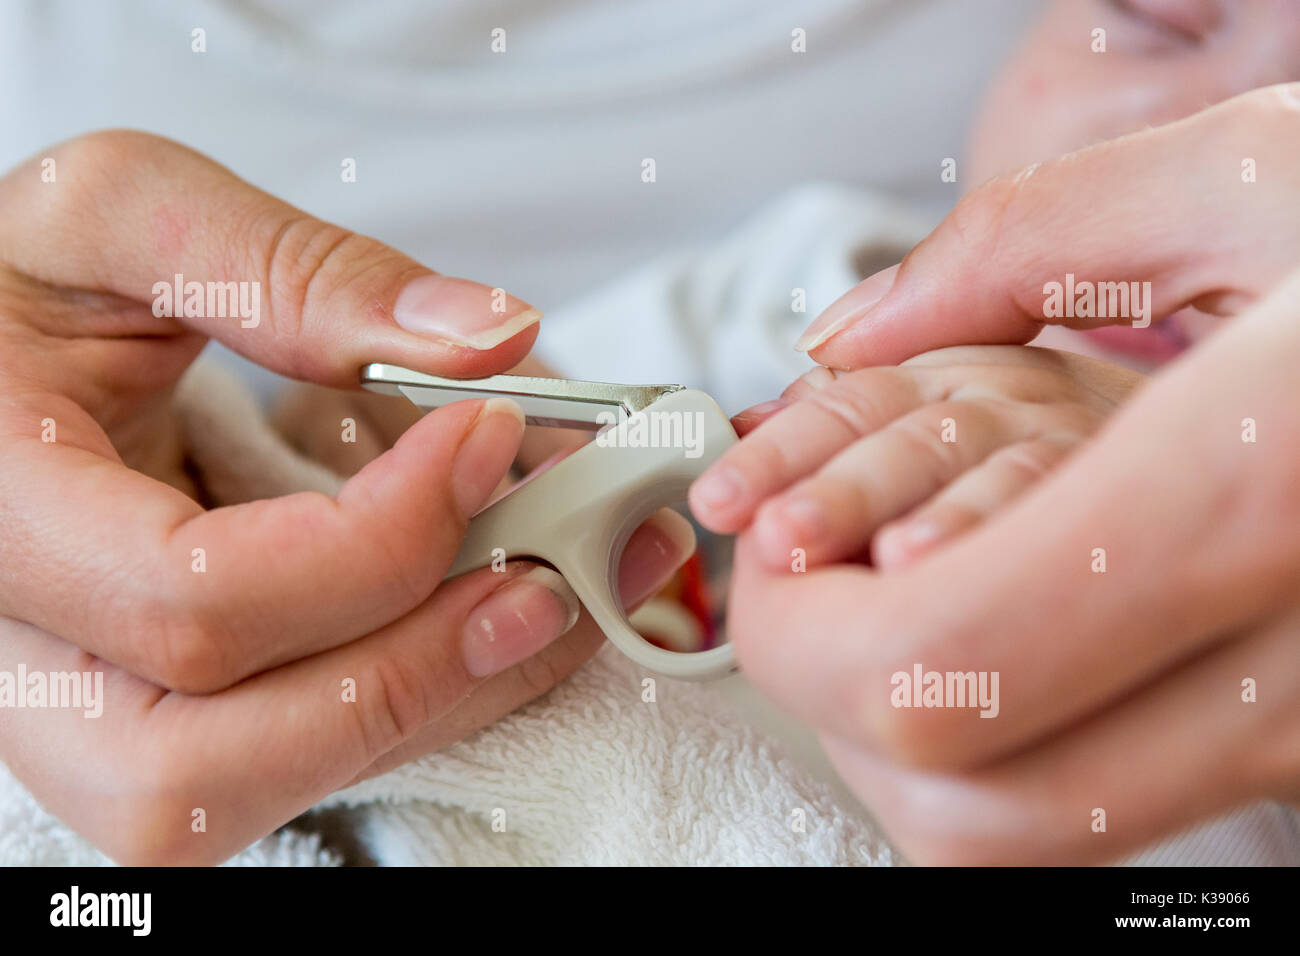 Mother gently cutting her baby nails Stock Photo - Alamy